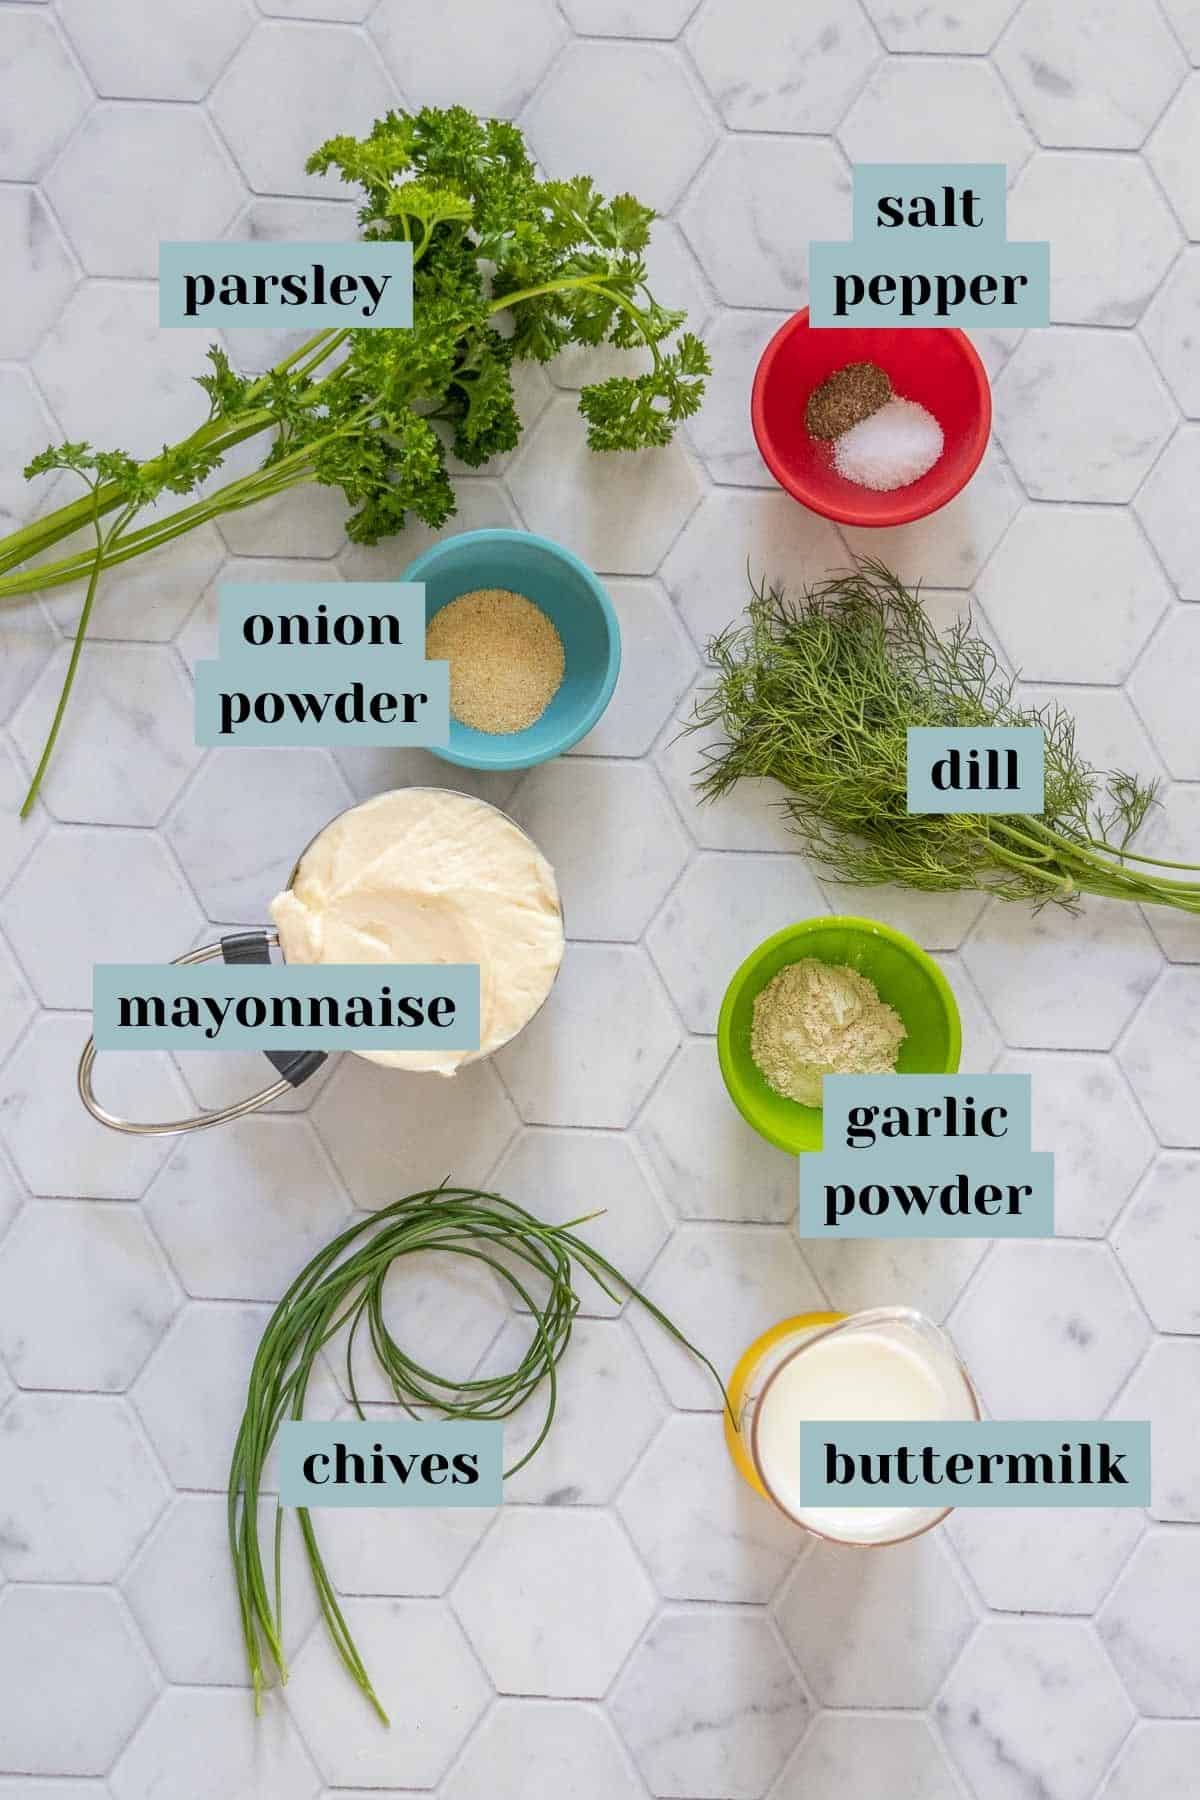 Ingredients for ranch dressing on a tile surface with labels.